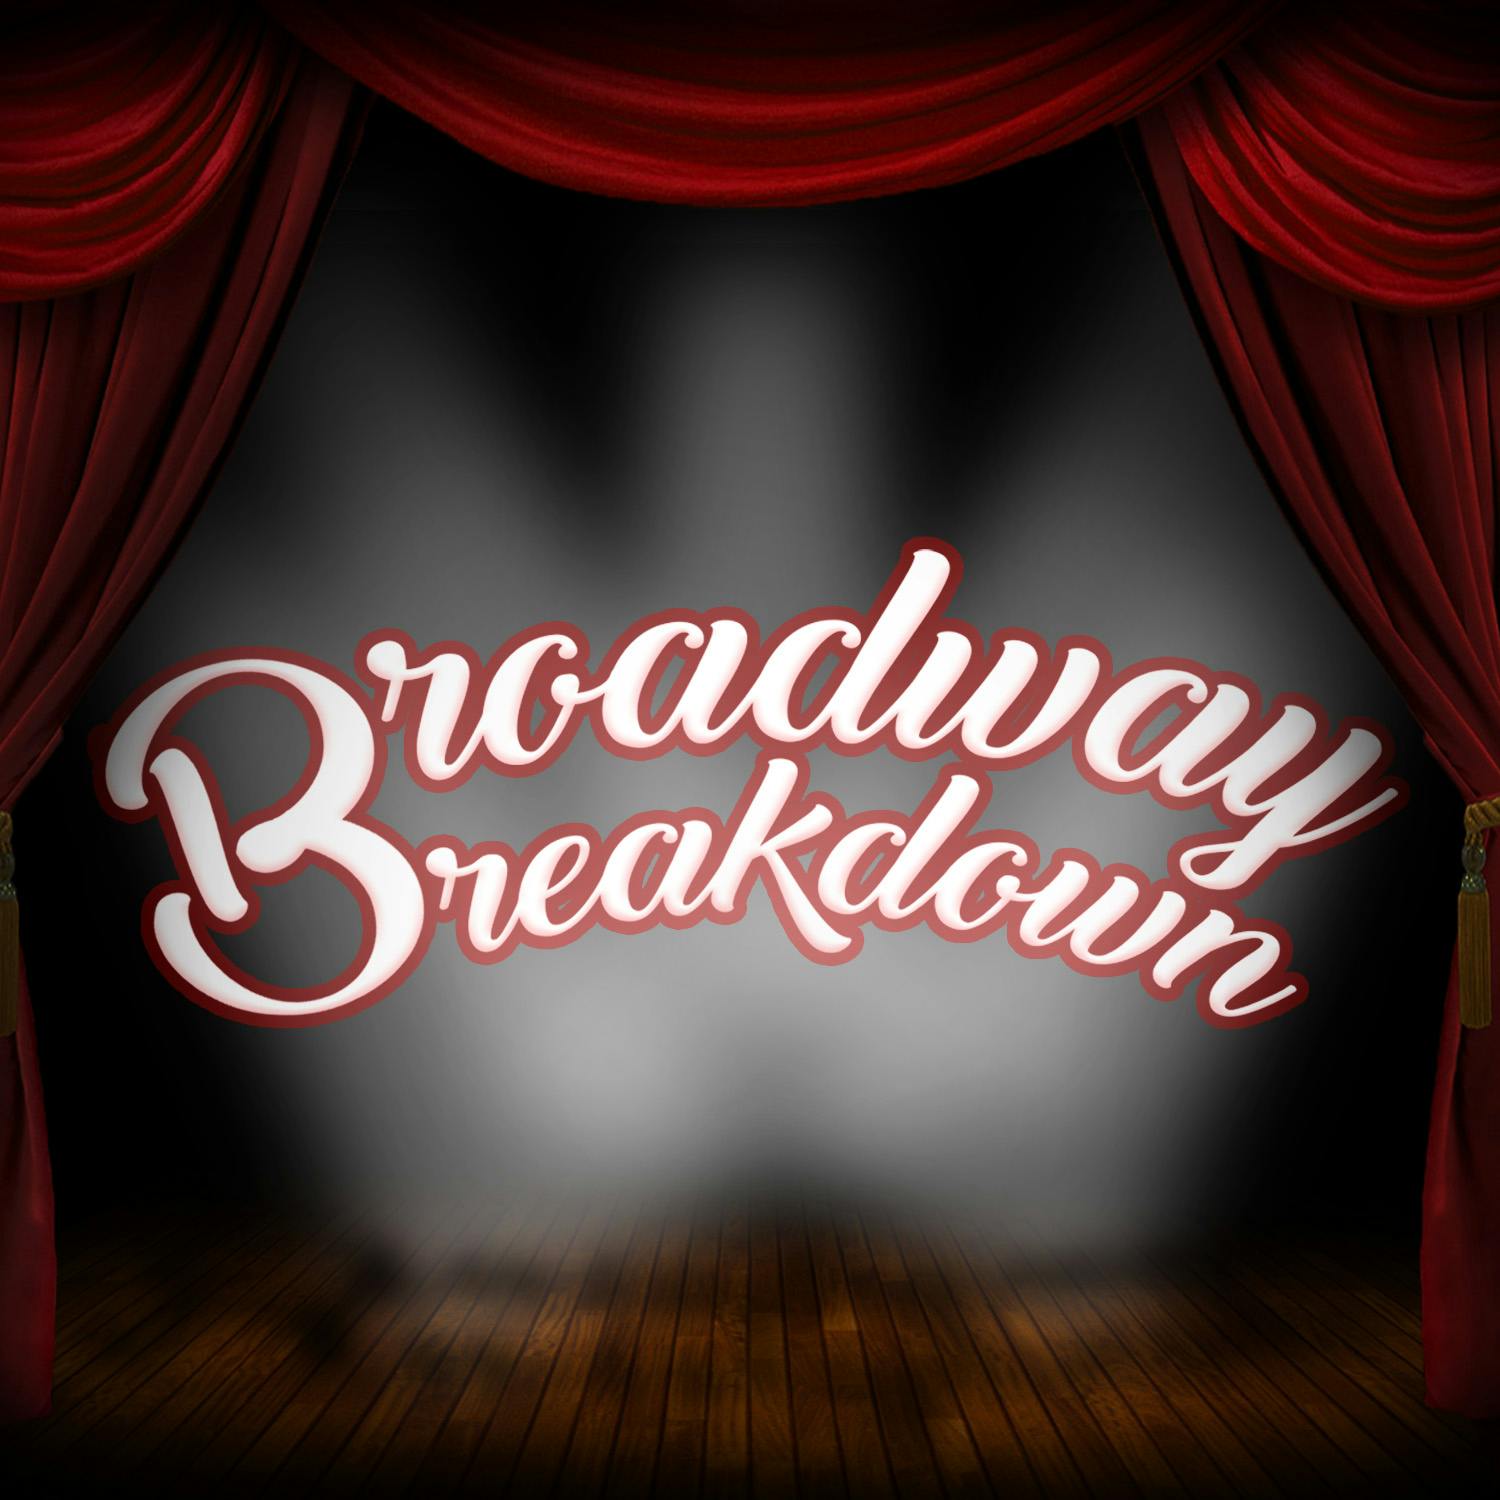 The Book of Mormon Musical Discussion – Broadway Breakdown